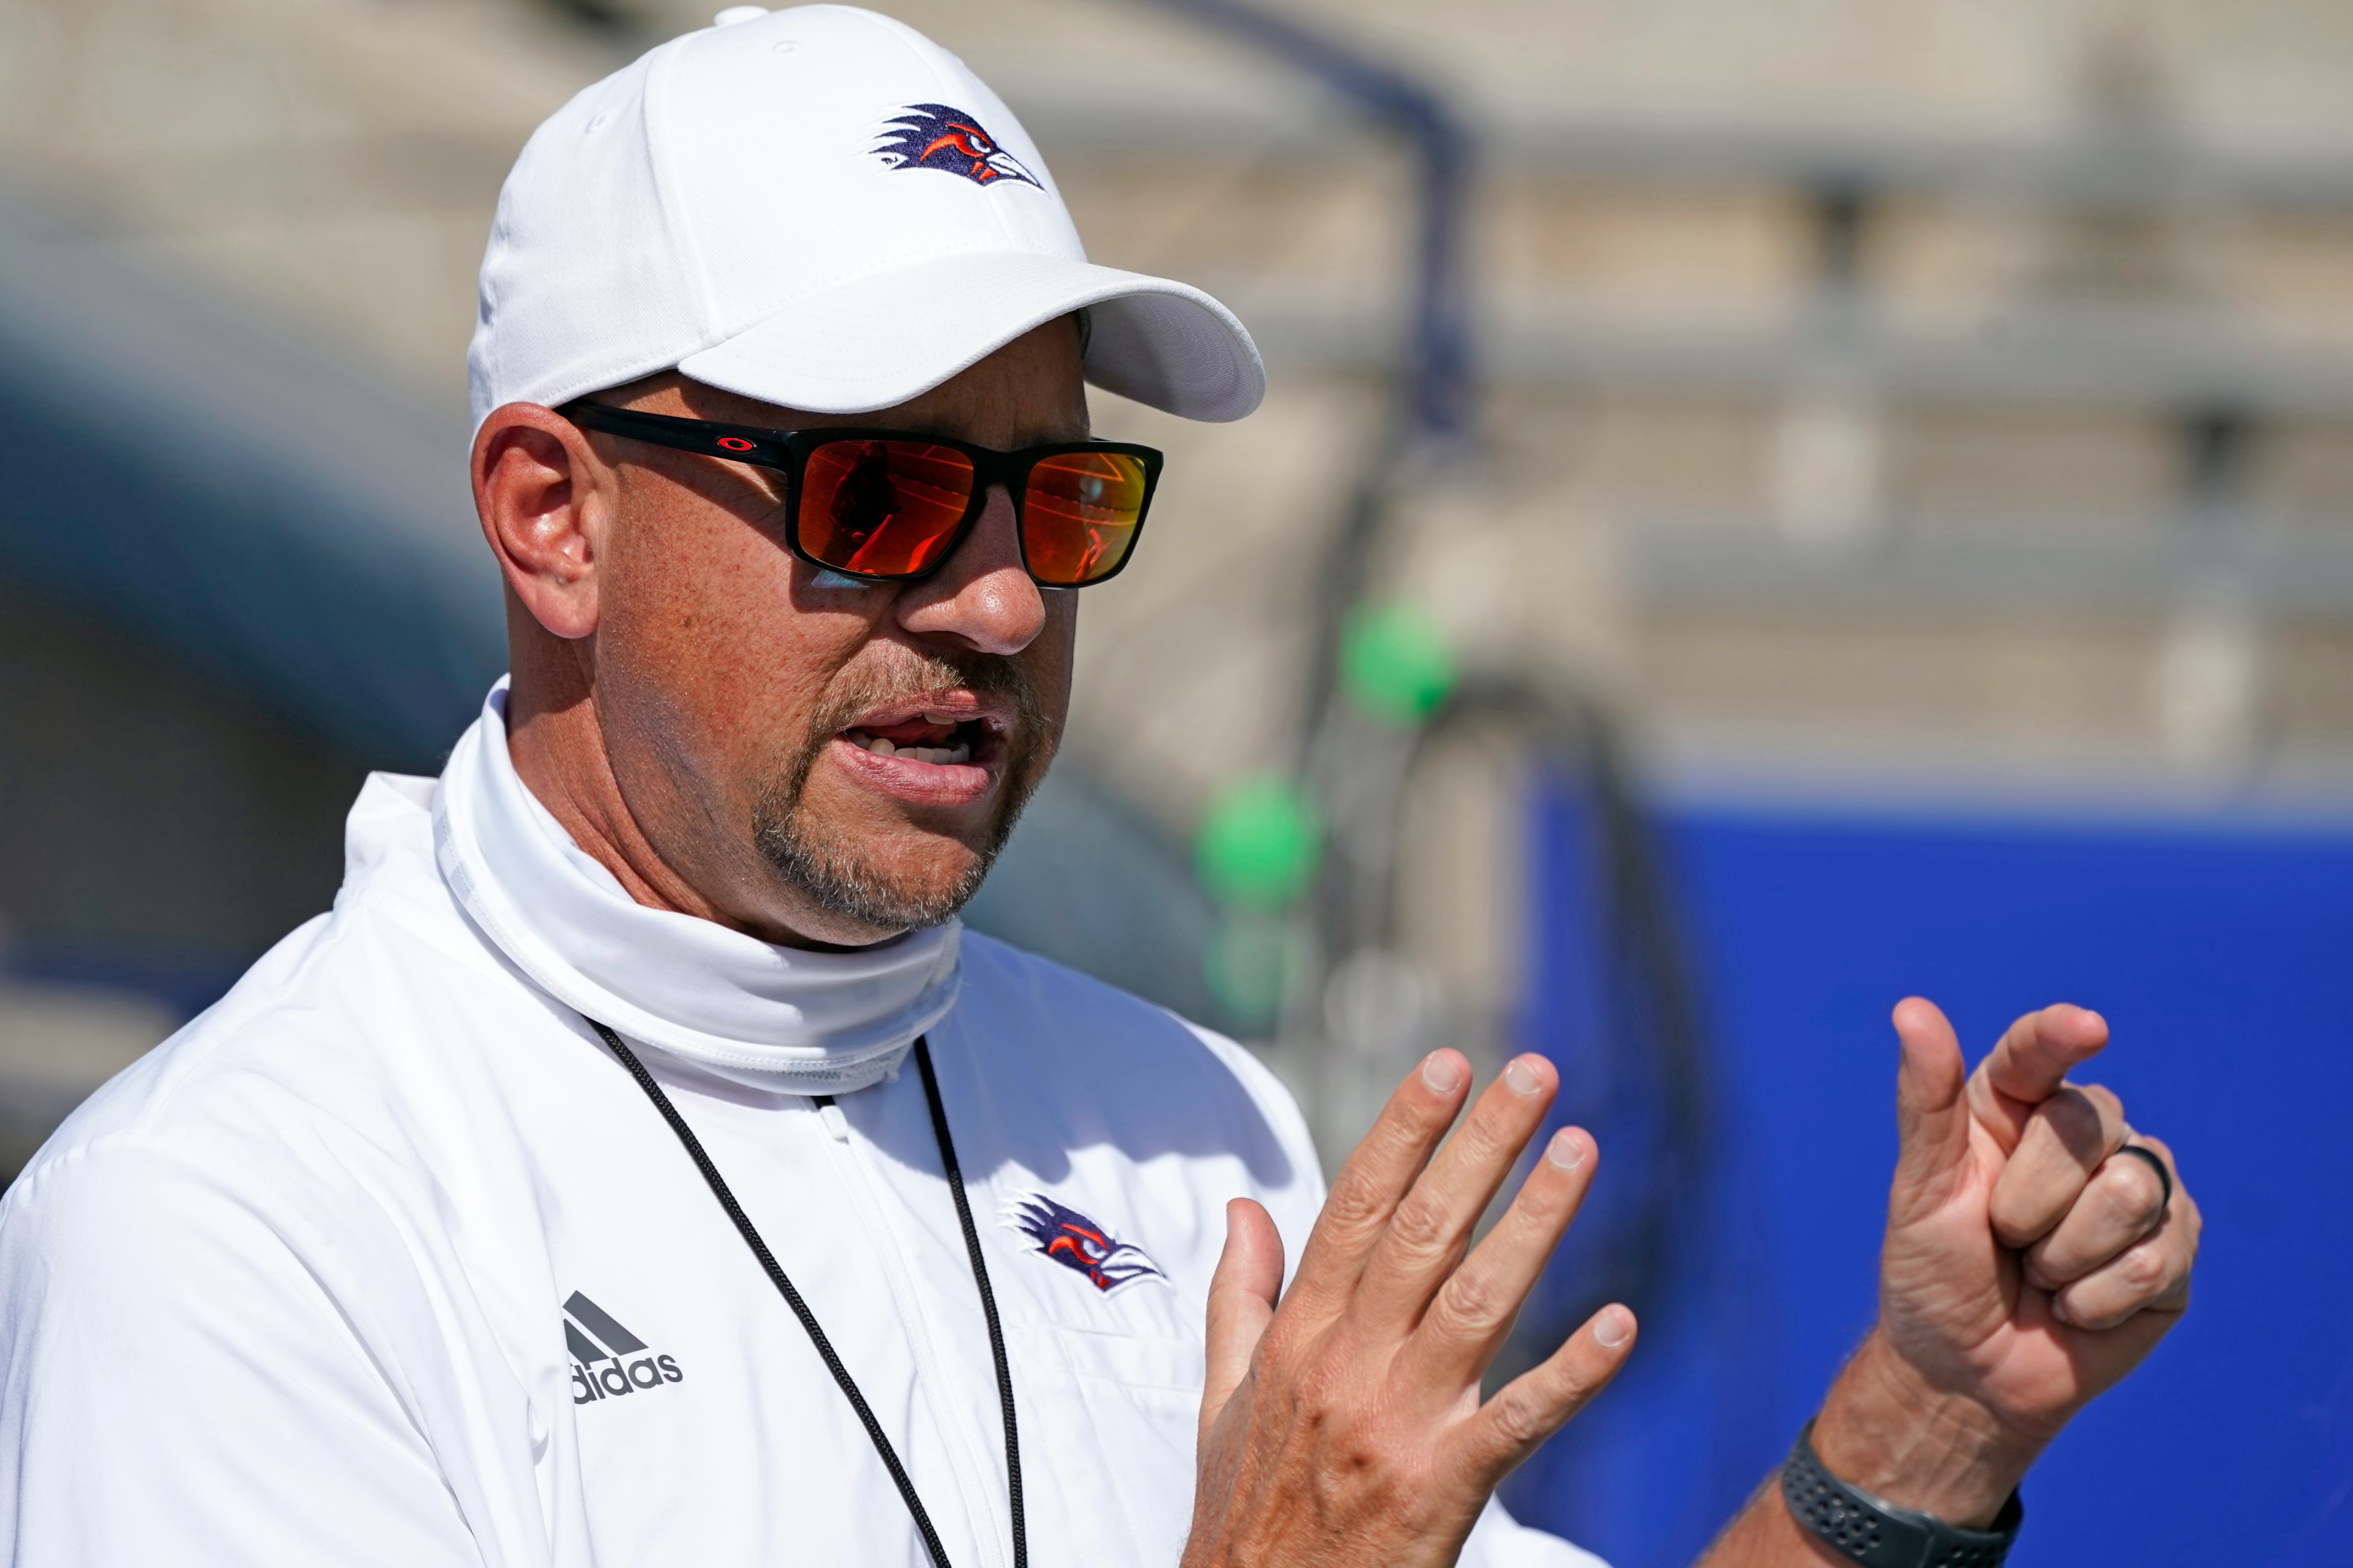 Texas Tech football: 5 things to know about UTSA’s Jeff Traylor - Wreck 'em Red